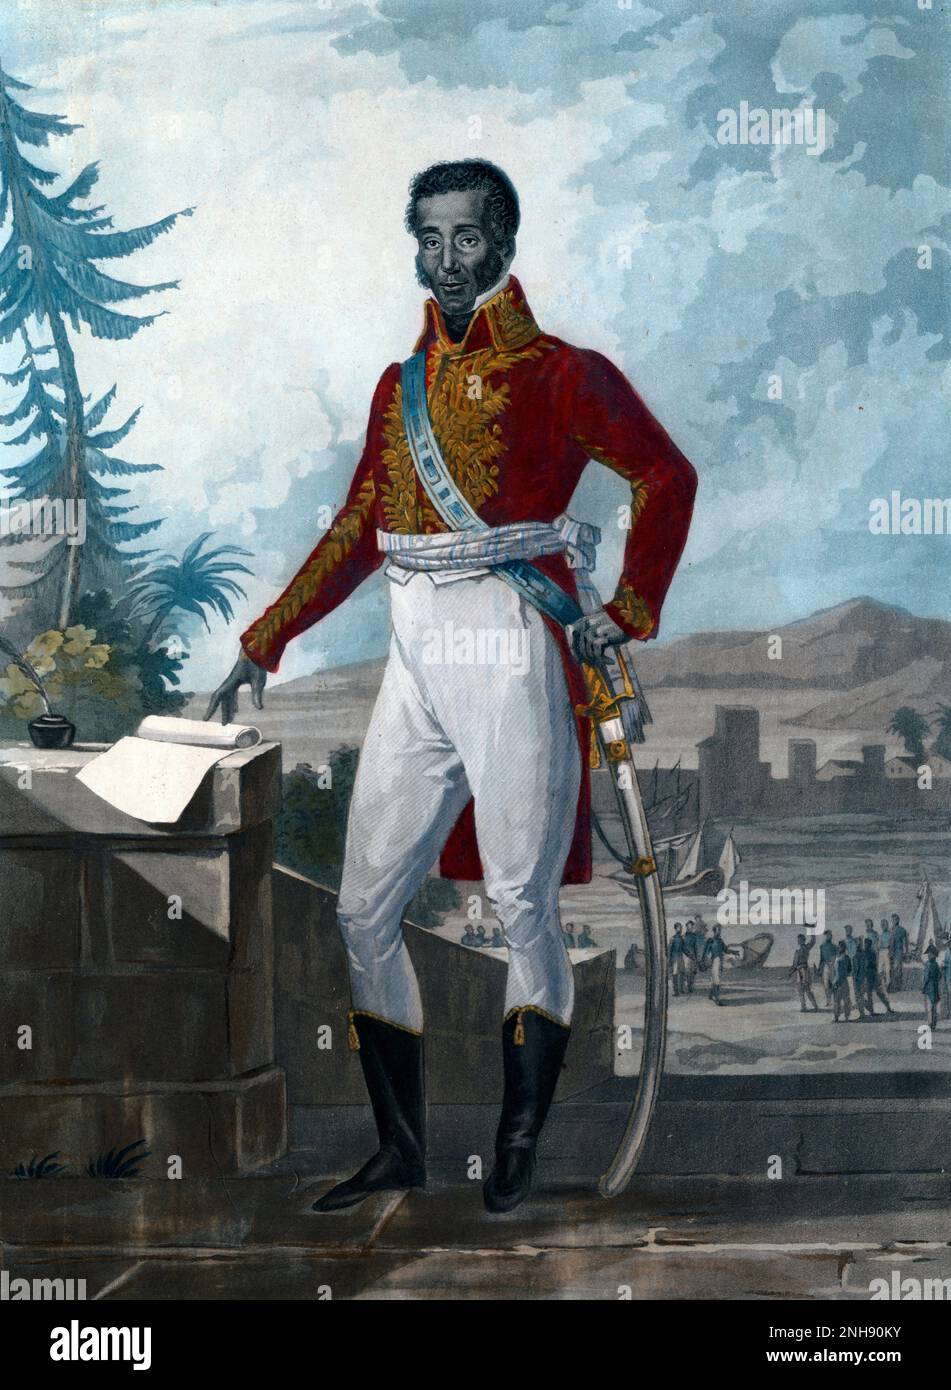 Aquatint print of Jean-Pierre Boyer, (1776-1850) one of the leaders of the Haitian Revolution, and President of Haiti from 1818 to 1843. Portrait by Pierre Martinet (1781-1815); print by Louis Fran√ßois Charon (1783-1839,). Print from 1820. Stock Photo